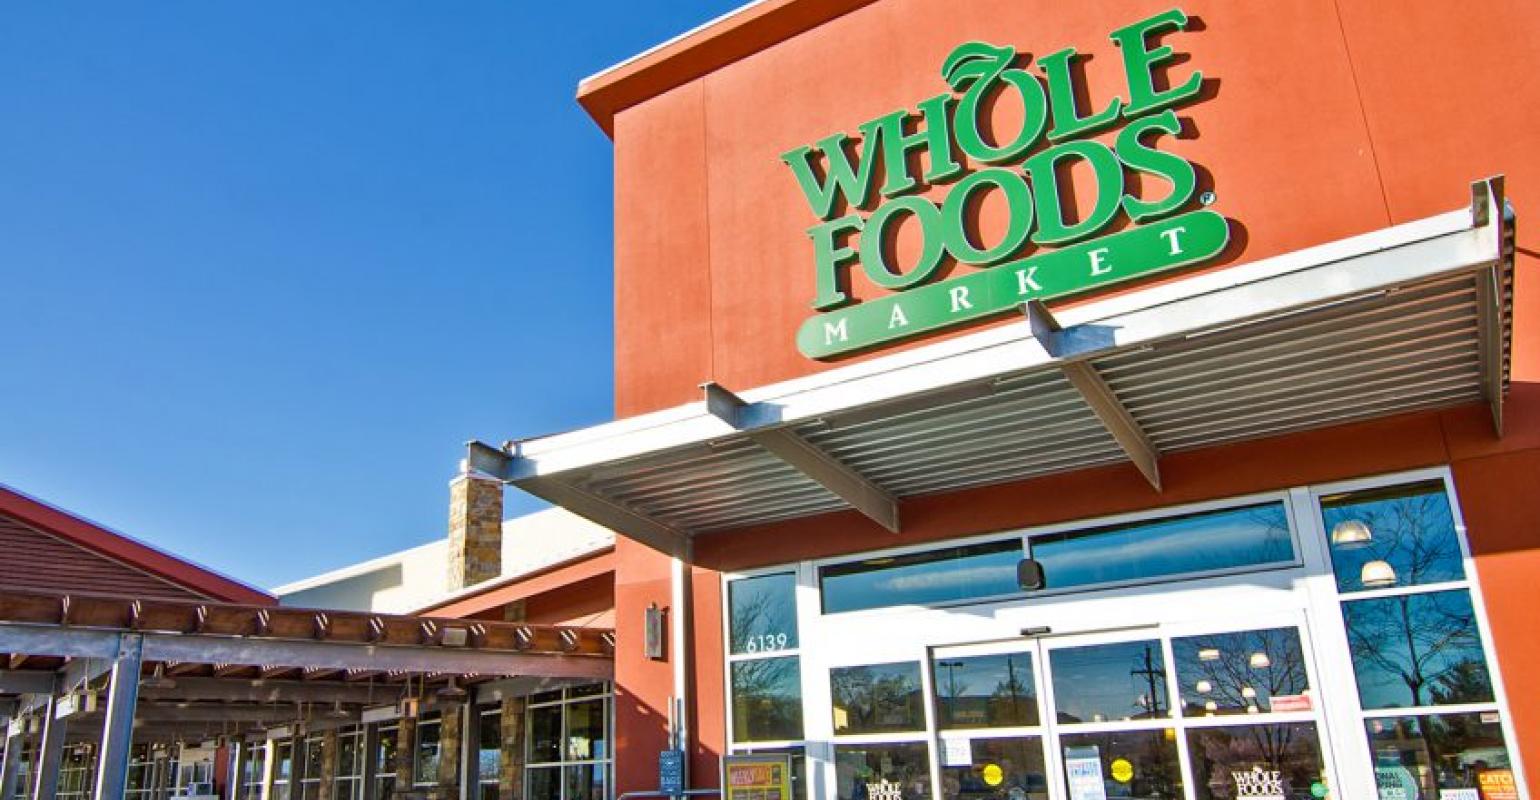 Whole Foods donated nearly 30 million meals to food programs in